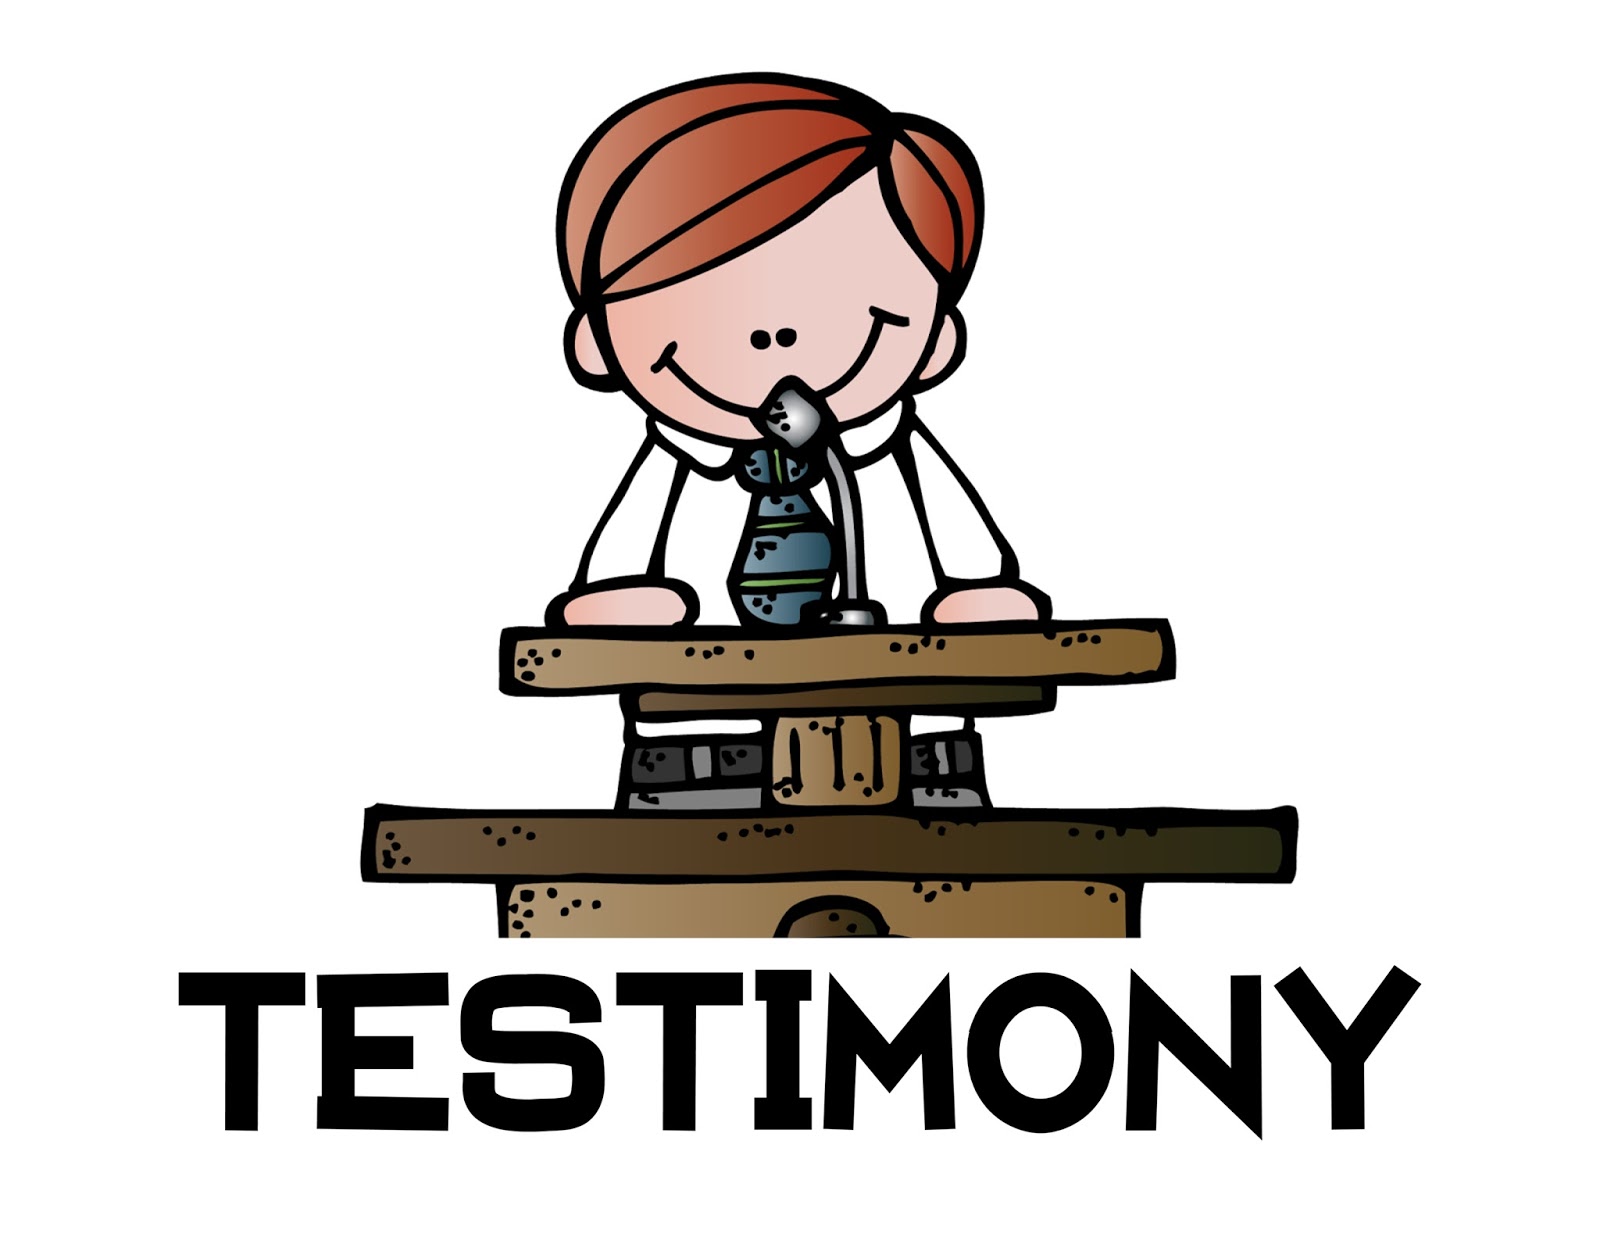 Lds clipart testimony. Free download best on